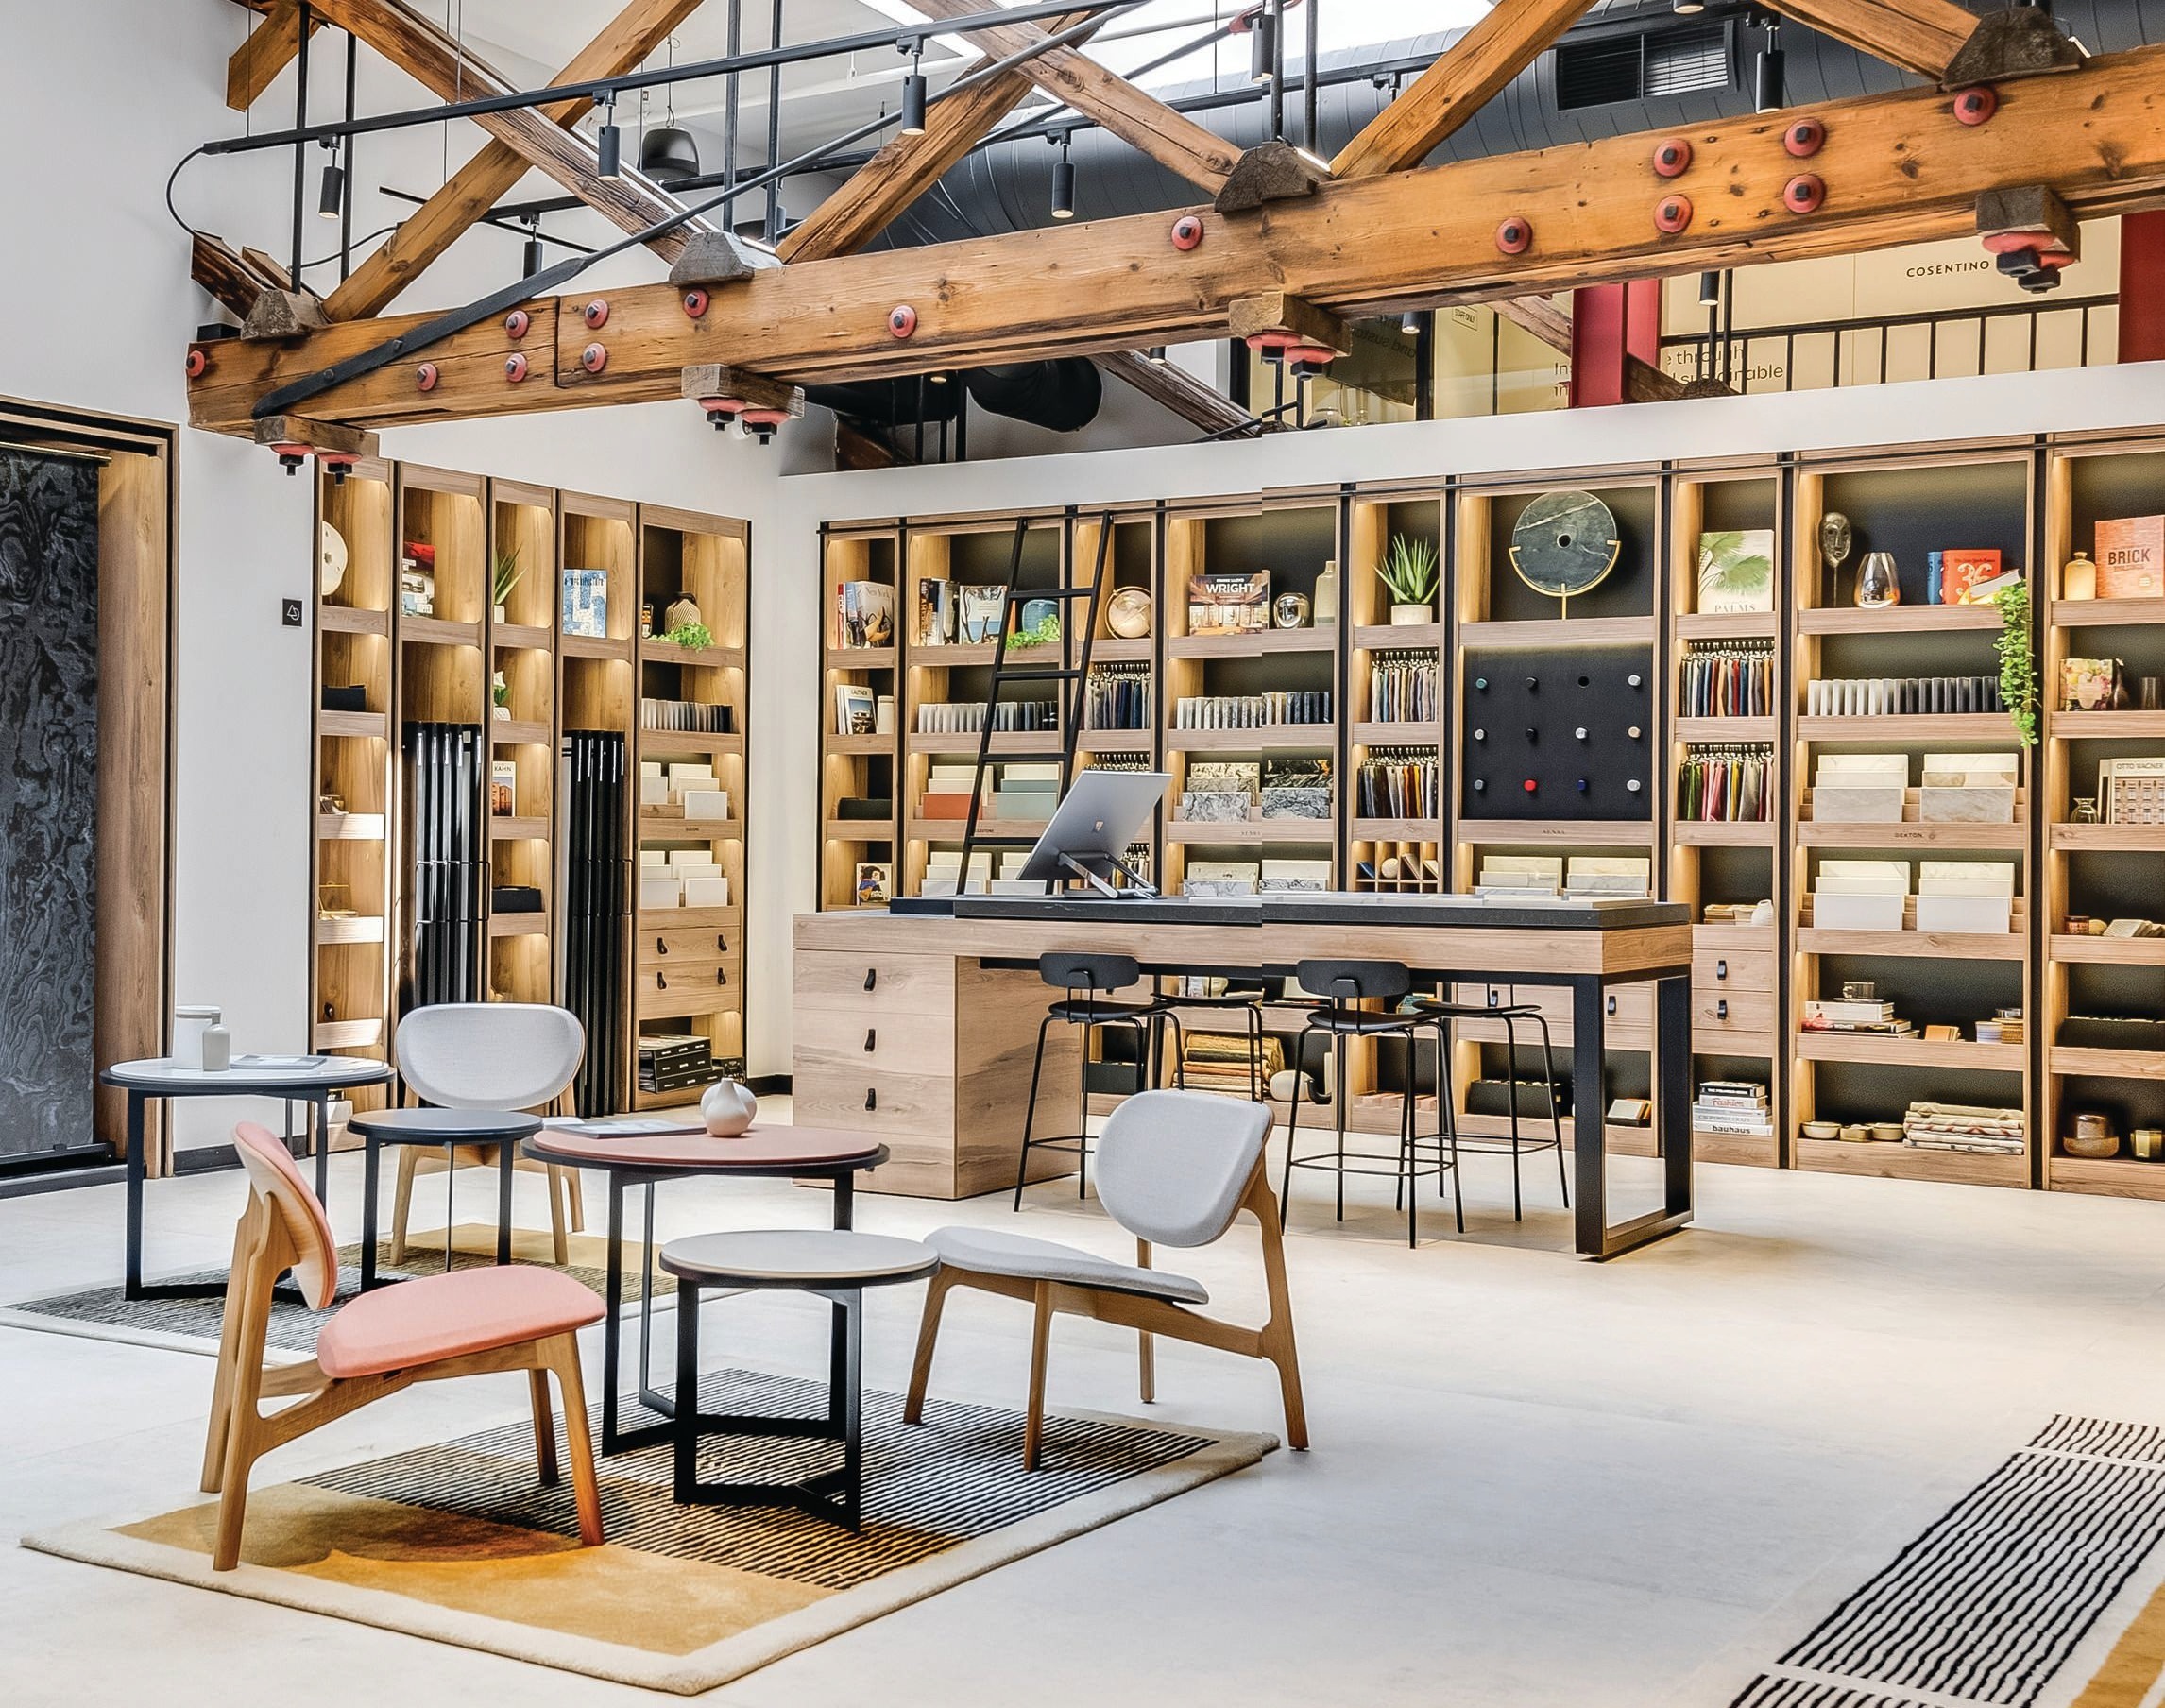 Cosentino’s stunning showroom is an inspo-filled showcase for its expansive surface offerings. PHOTO COURTESY OF BRANDS